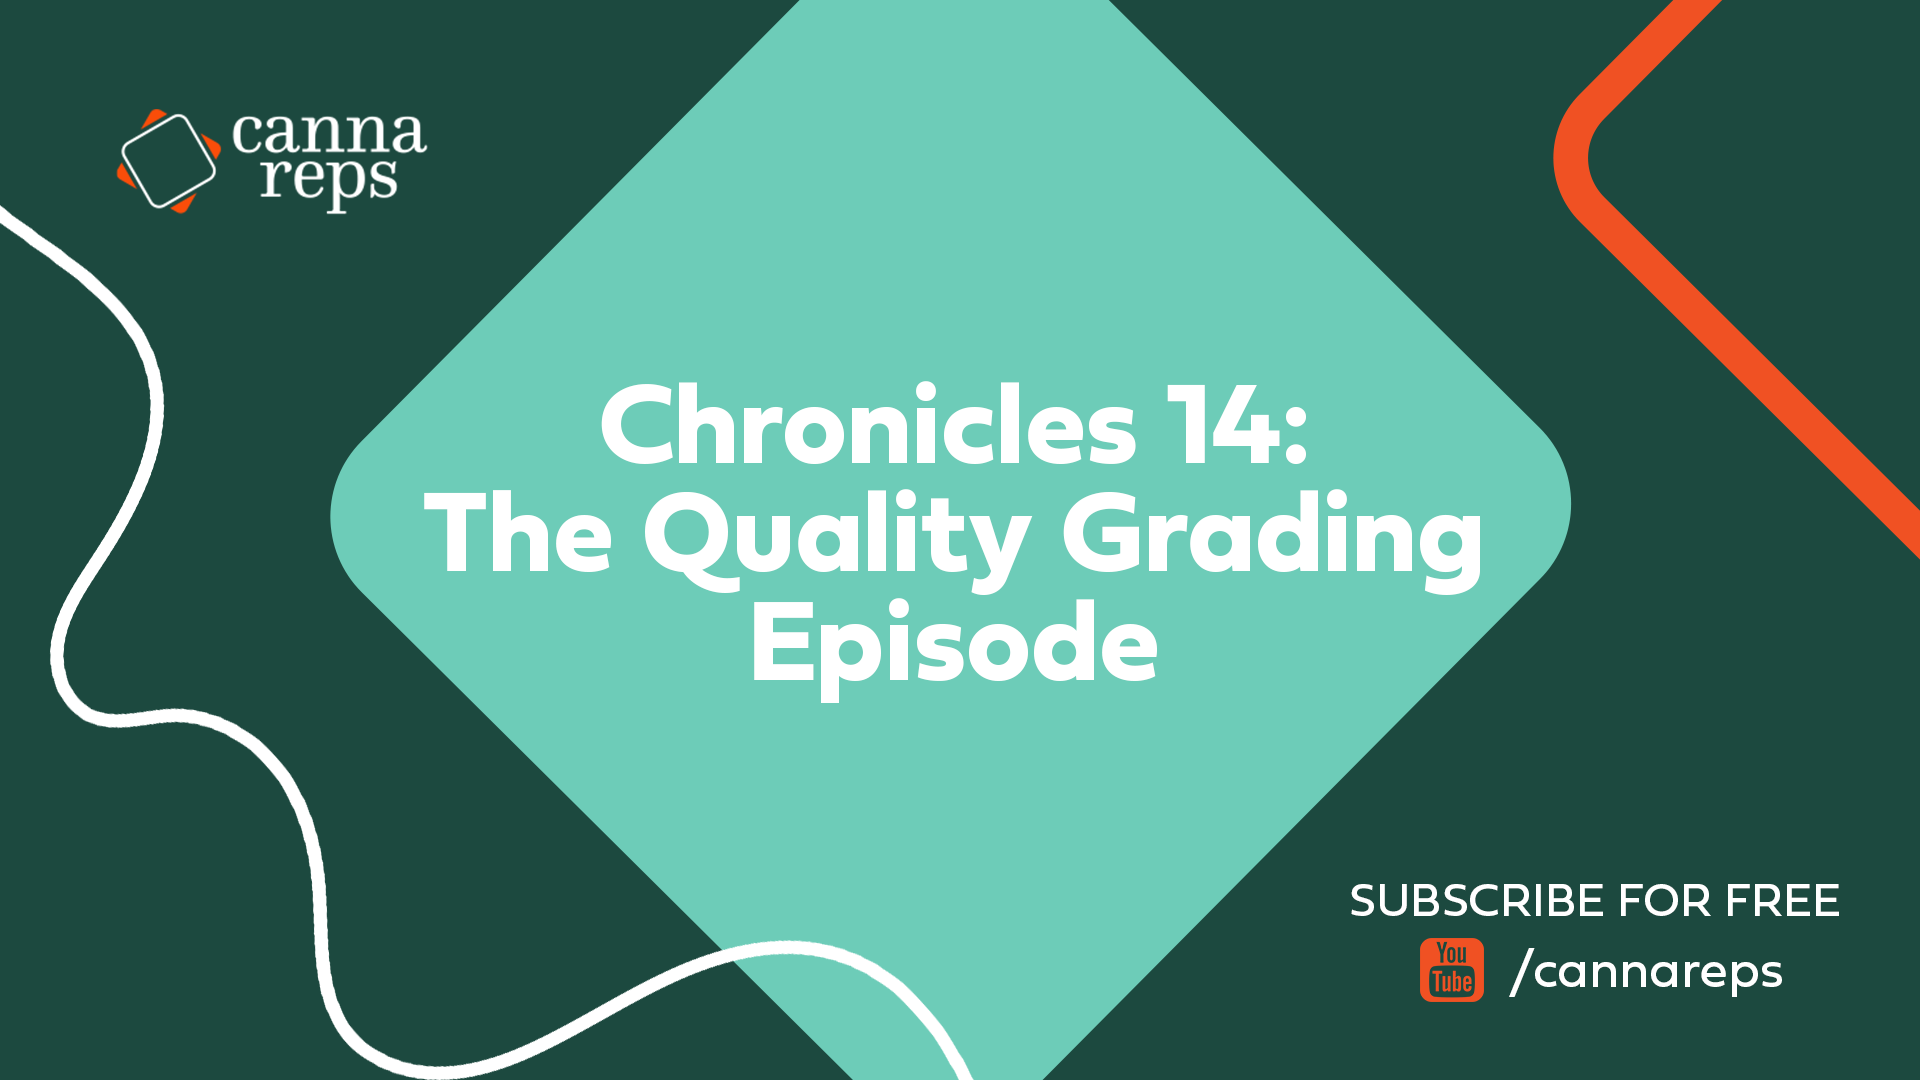 CHRONICLES 14 - The Quality Grading